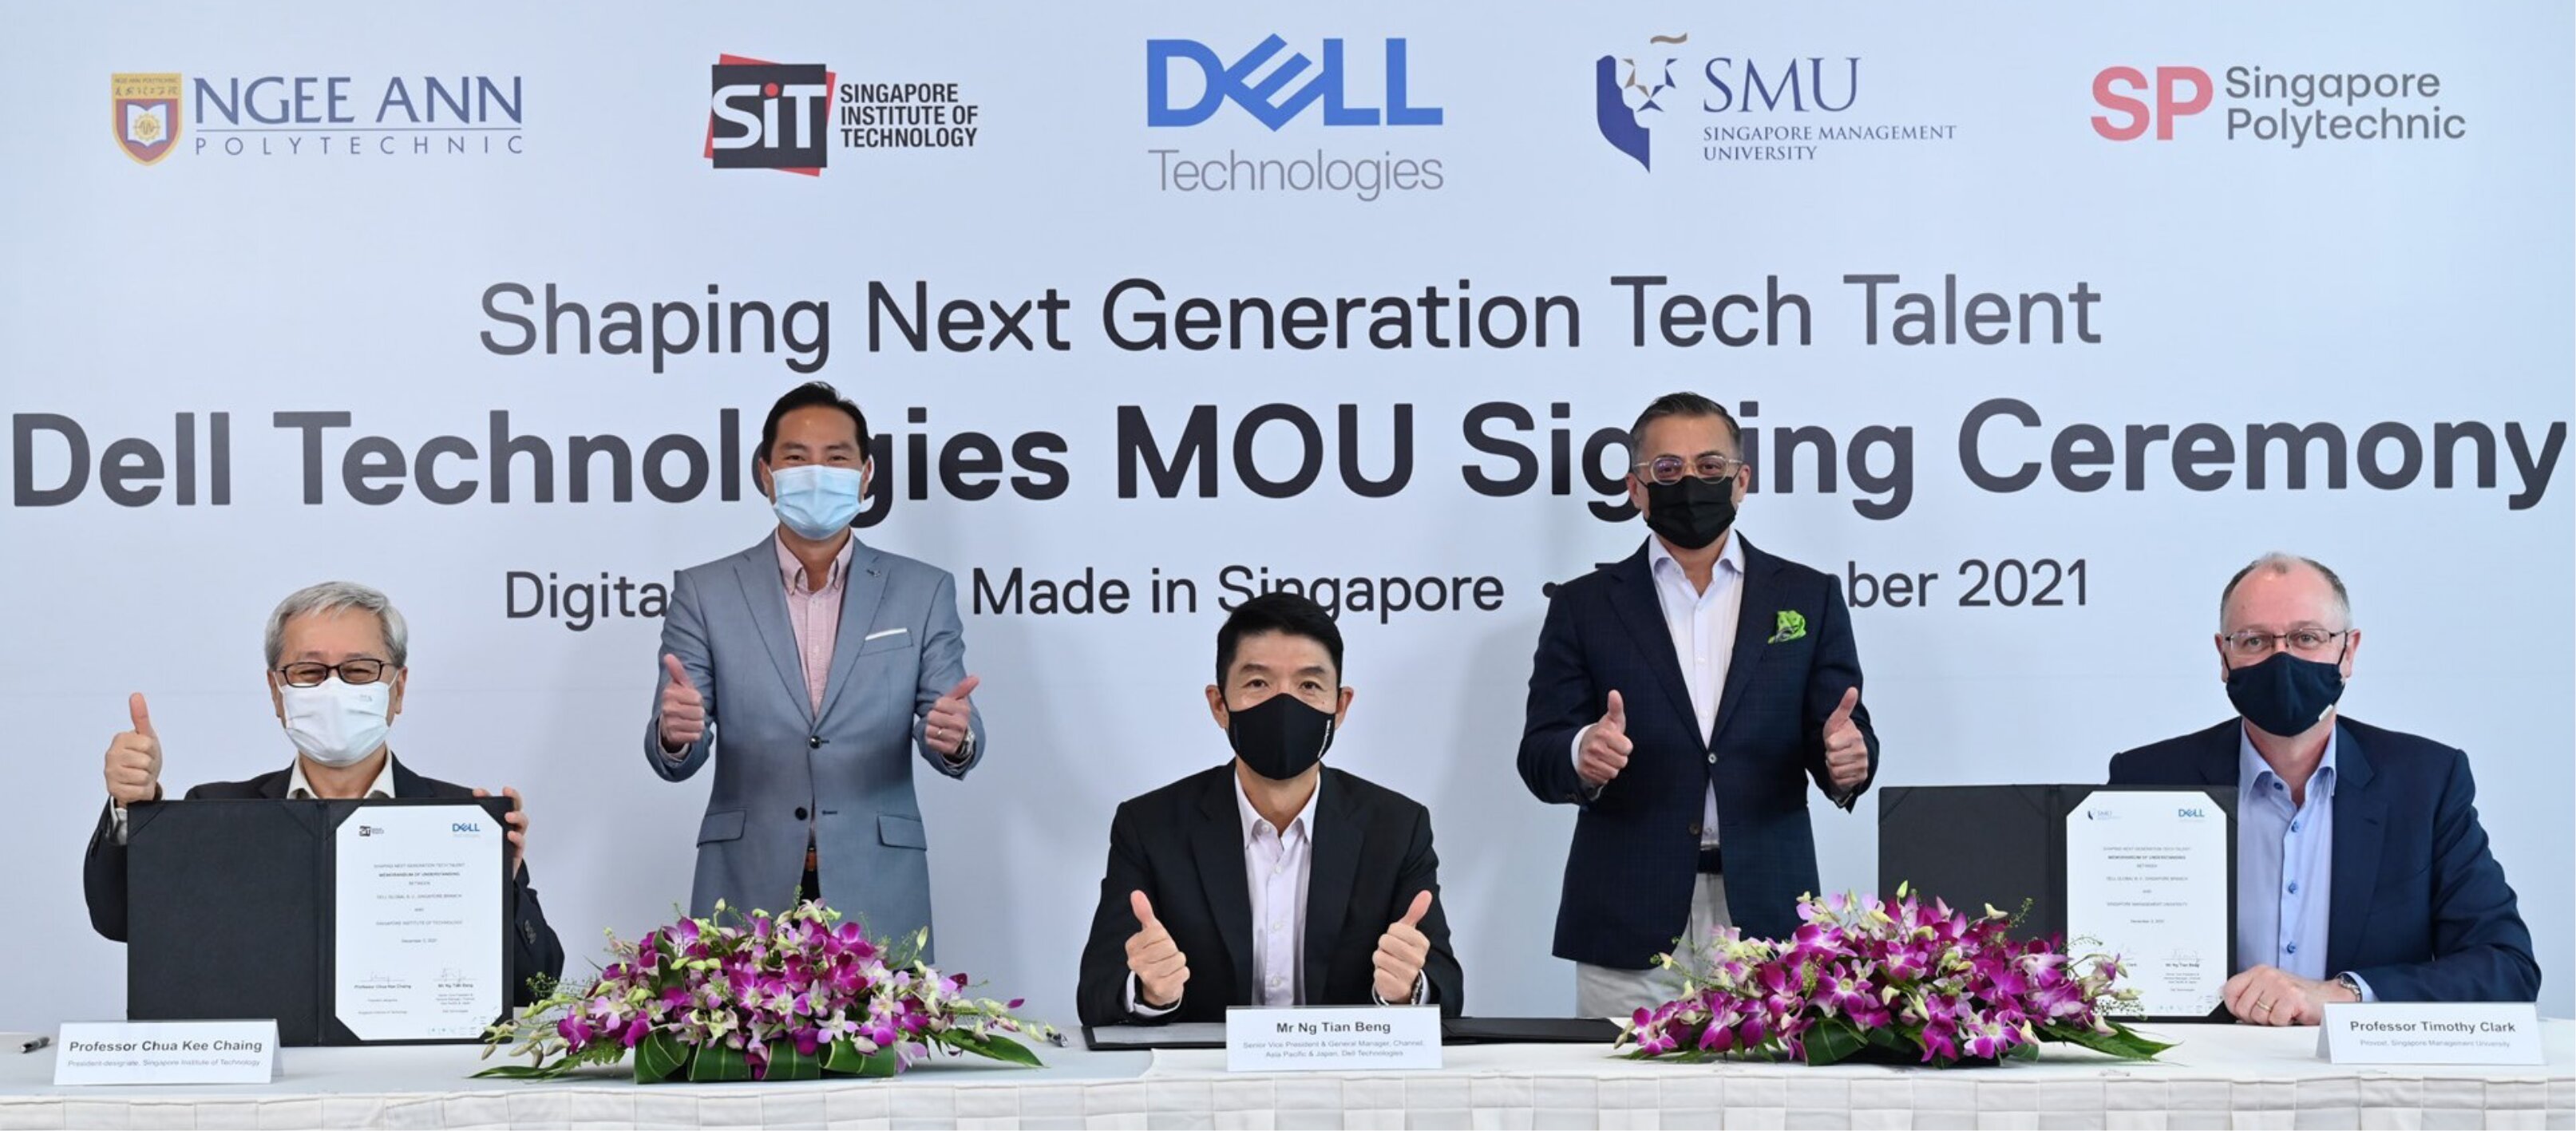 Representatives from Dell Technologies and Institutes of Higher Learning signing the MOU (seated, from left): Prof Chua Kee Chaing, SIT President; Mr Ng Tian Beng, Senior Vice President & General Manager, Channel, Asia Pacific & Japan, Dell Technologies; and Prof Timothy Clark, Provost, Singapore Management University. The signing ceremony was witnessed by (standing, from left): Mr Tan Kiat How, Senior Minister of State, Ministry of Communications & Information and Ministry of National Development; and Mr Amit Midha, President, Asia Pacific & Japan, and Global Digital Cities, Dell Technologies. (Photo courtesy of Dell Technologies)